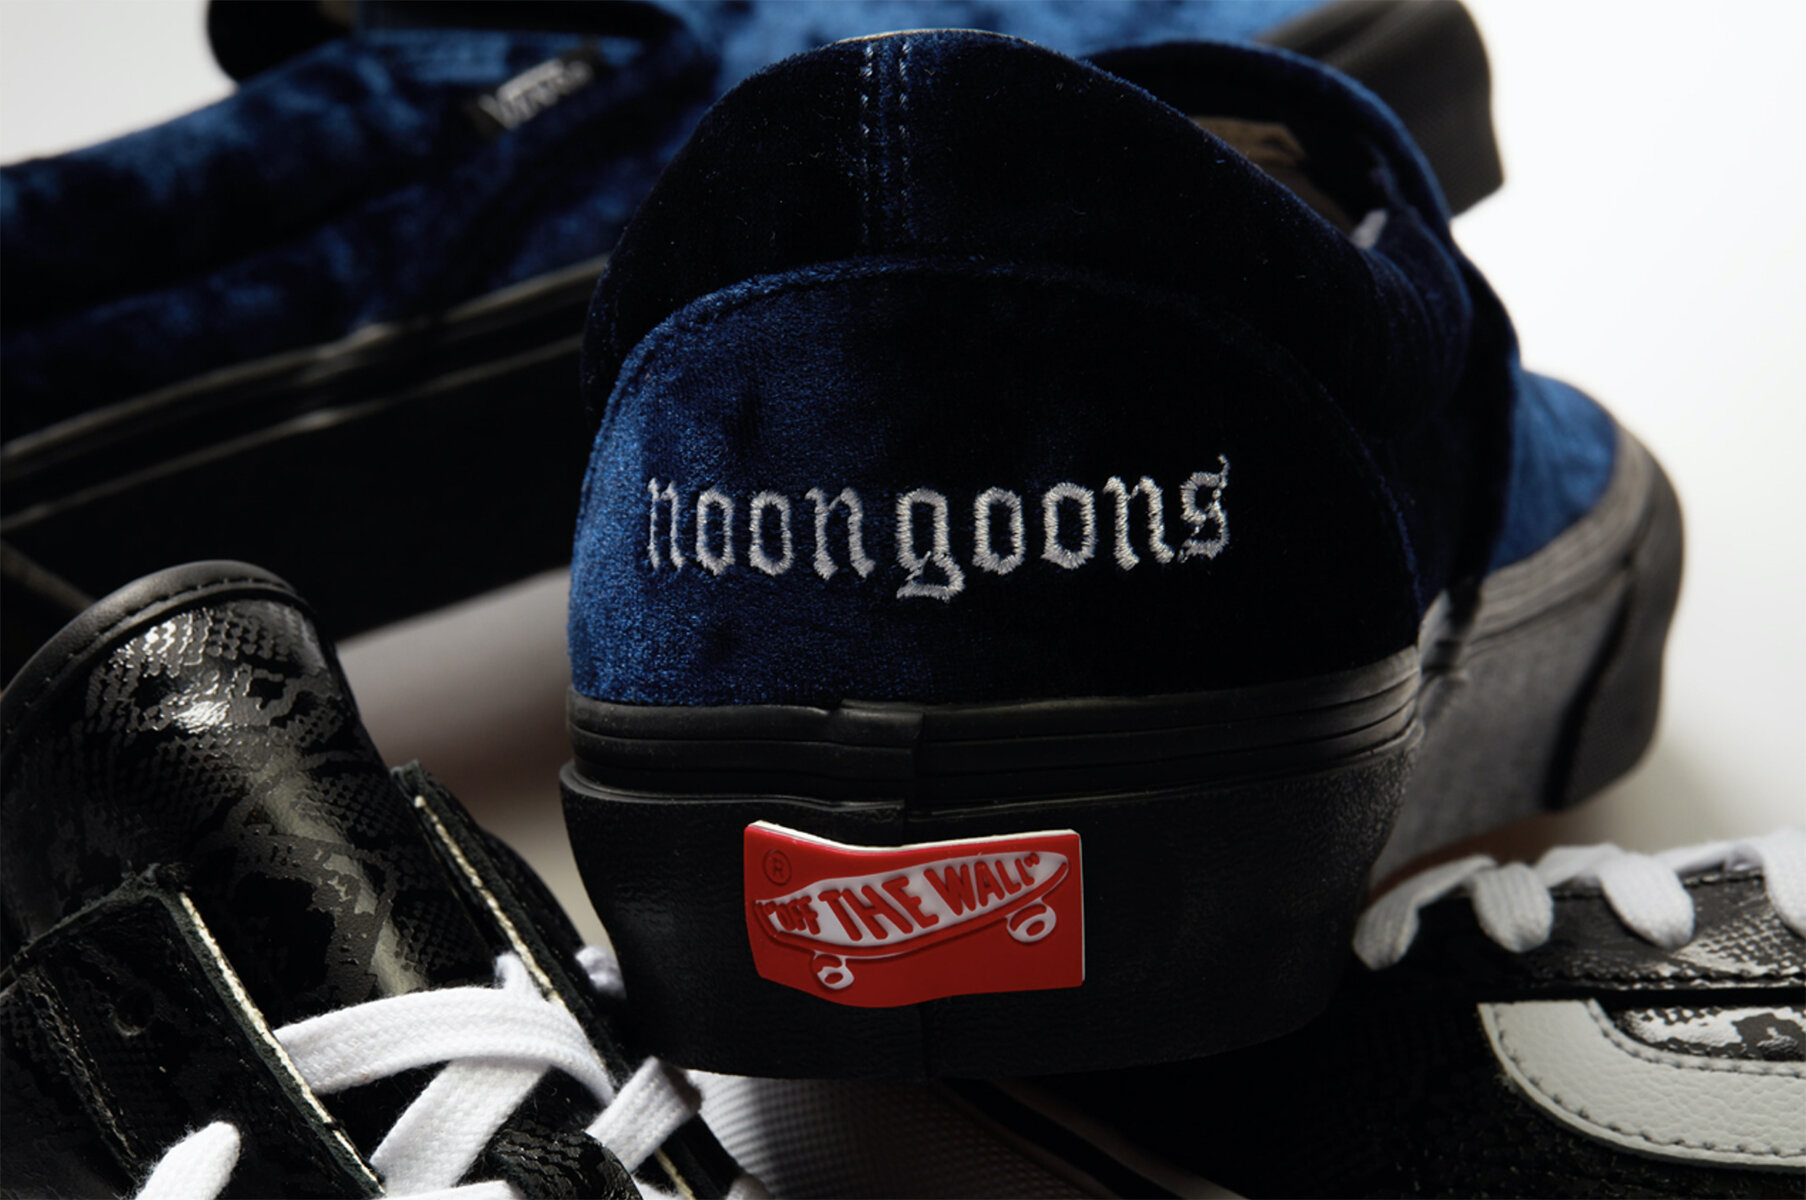 Backyard Opera - The Vault by Vans x Noon Goons collection